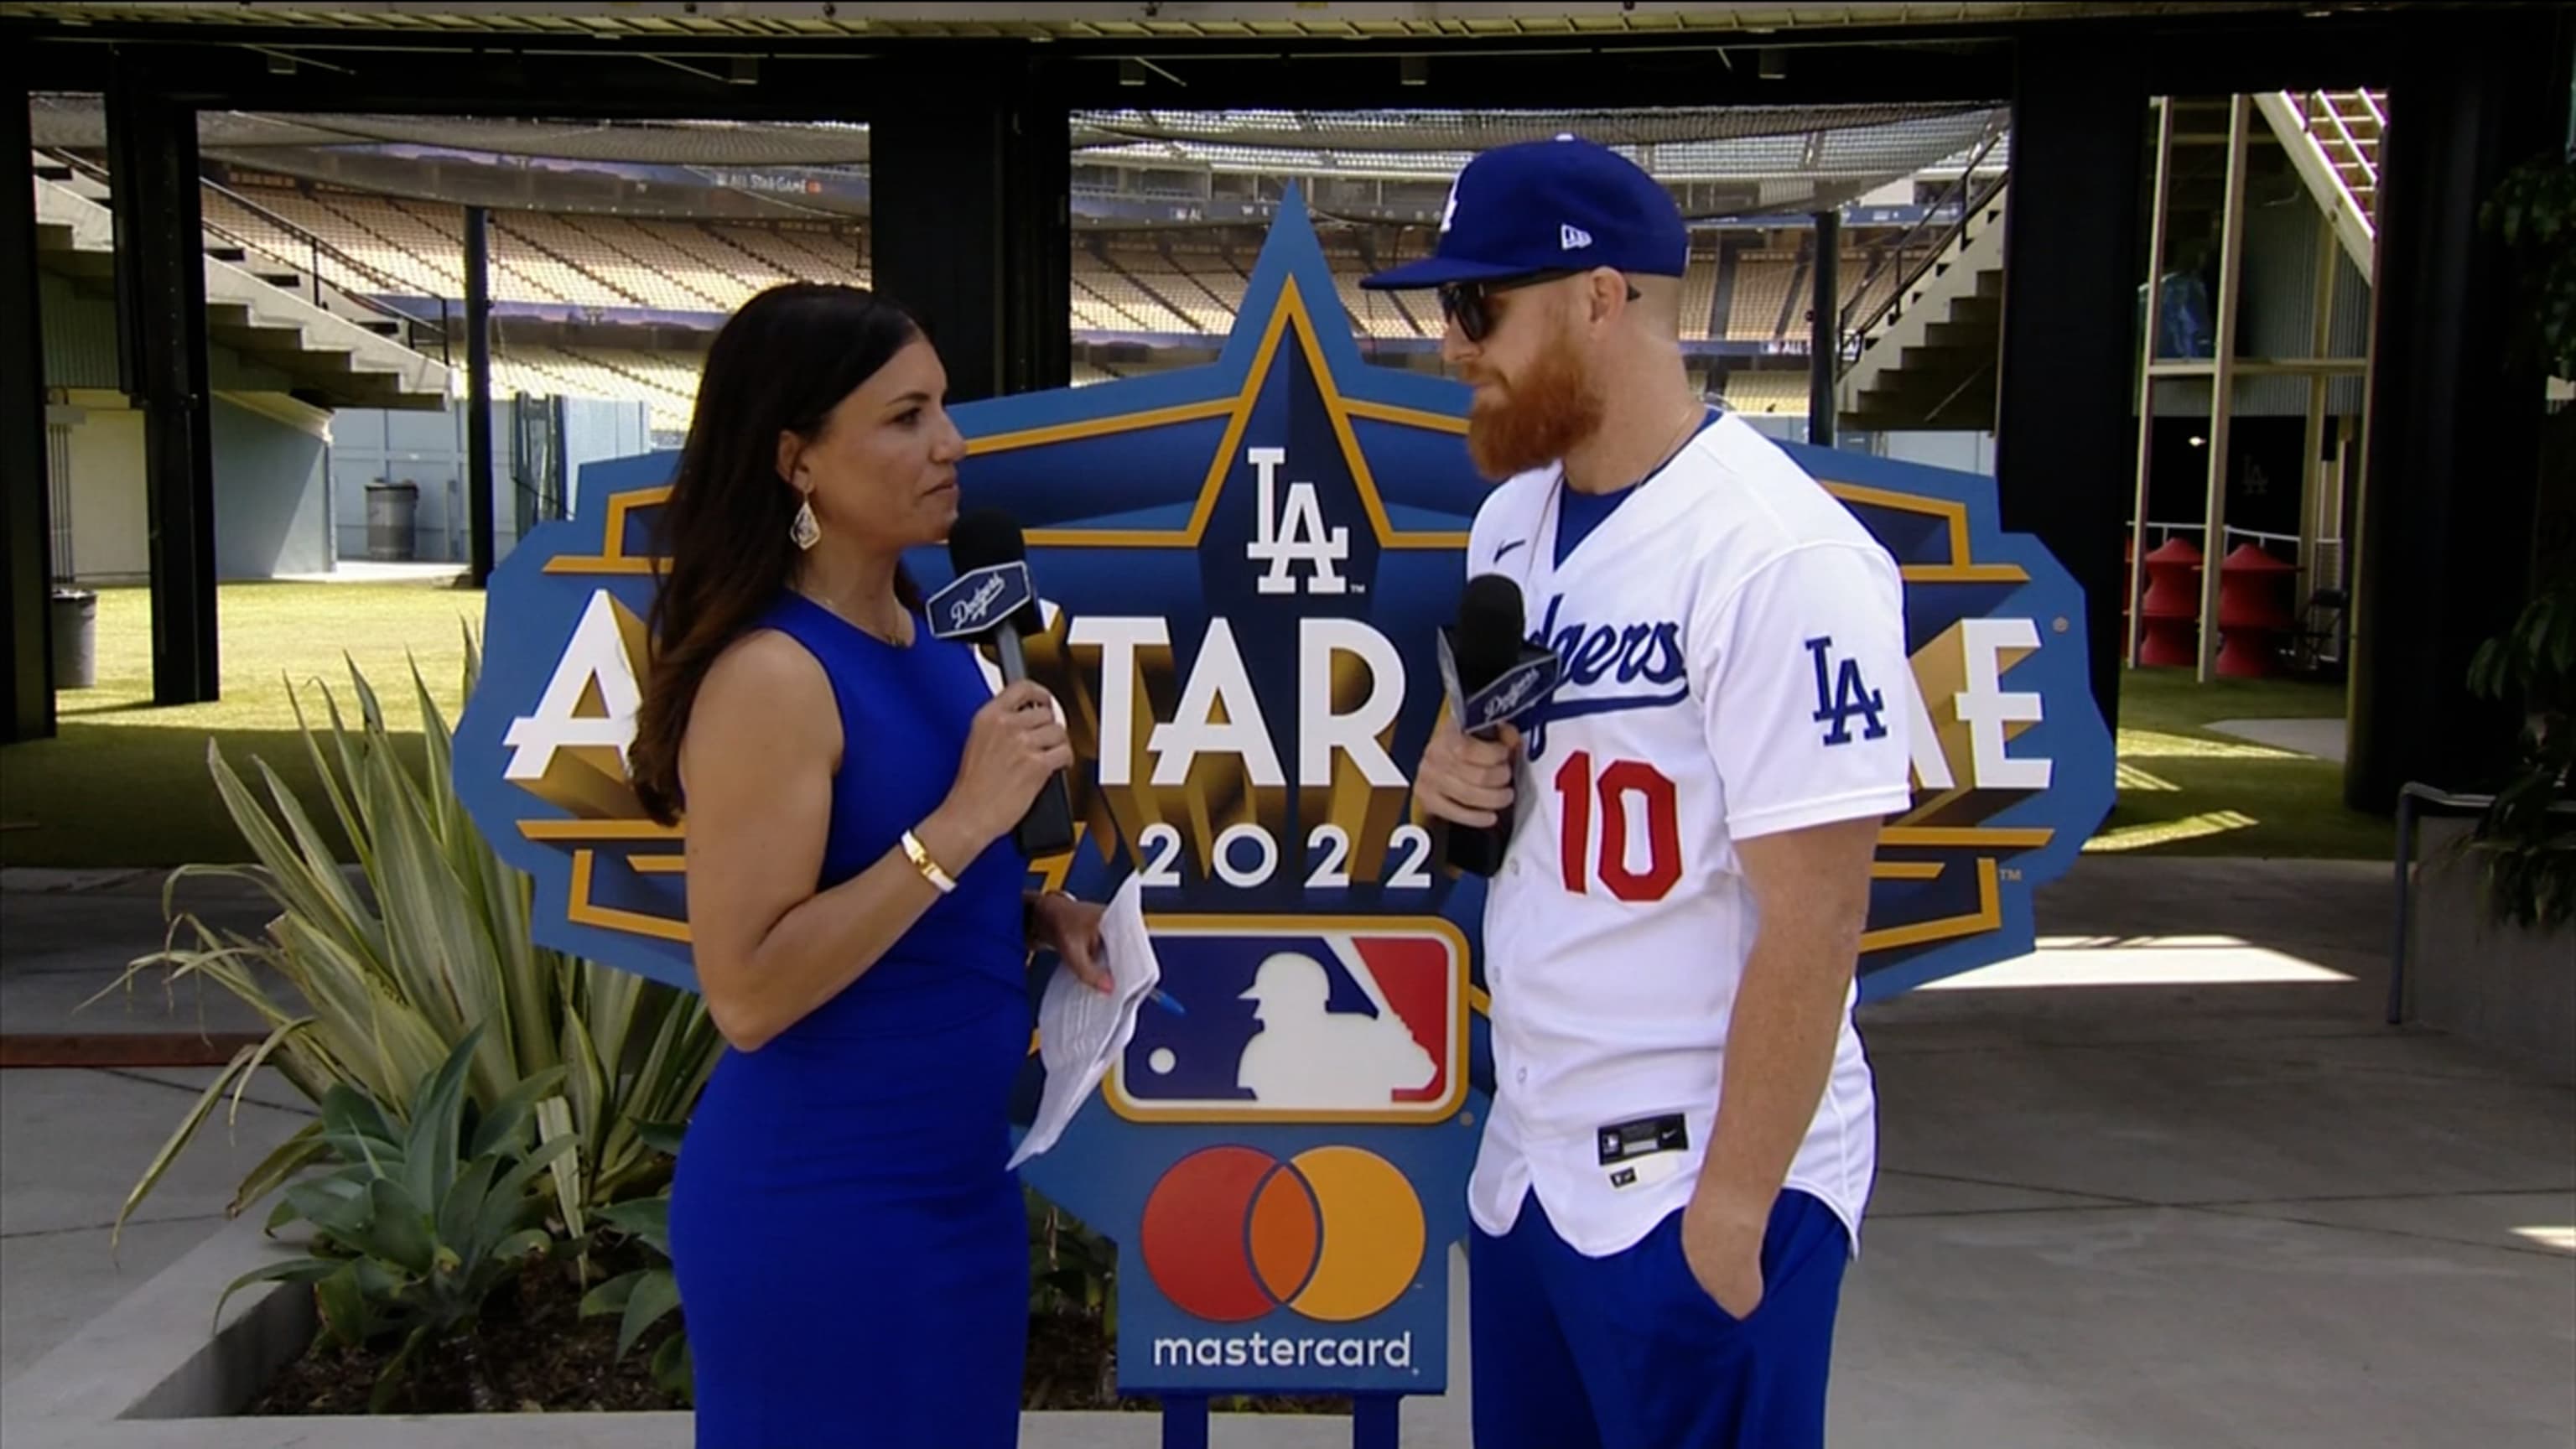 MLB and the LA Dodgers official countdown to All-Star week